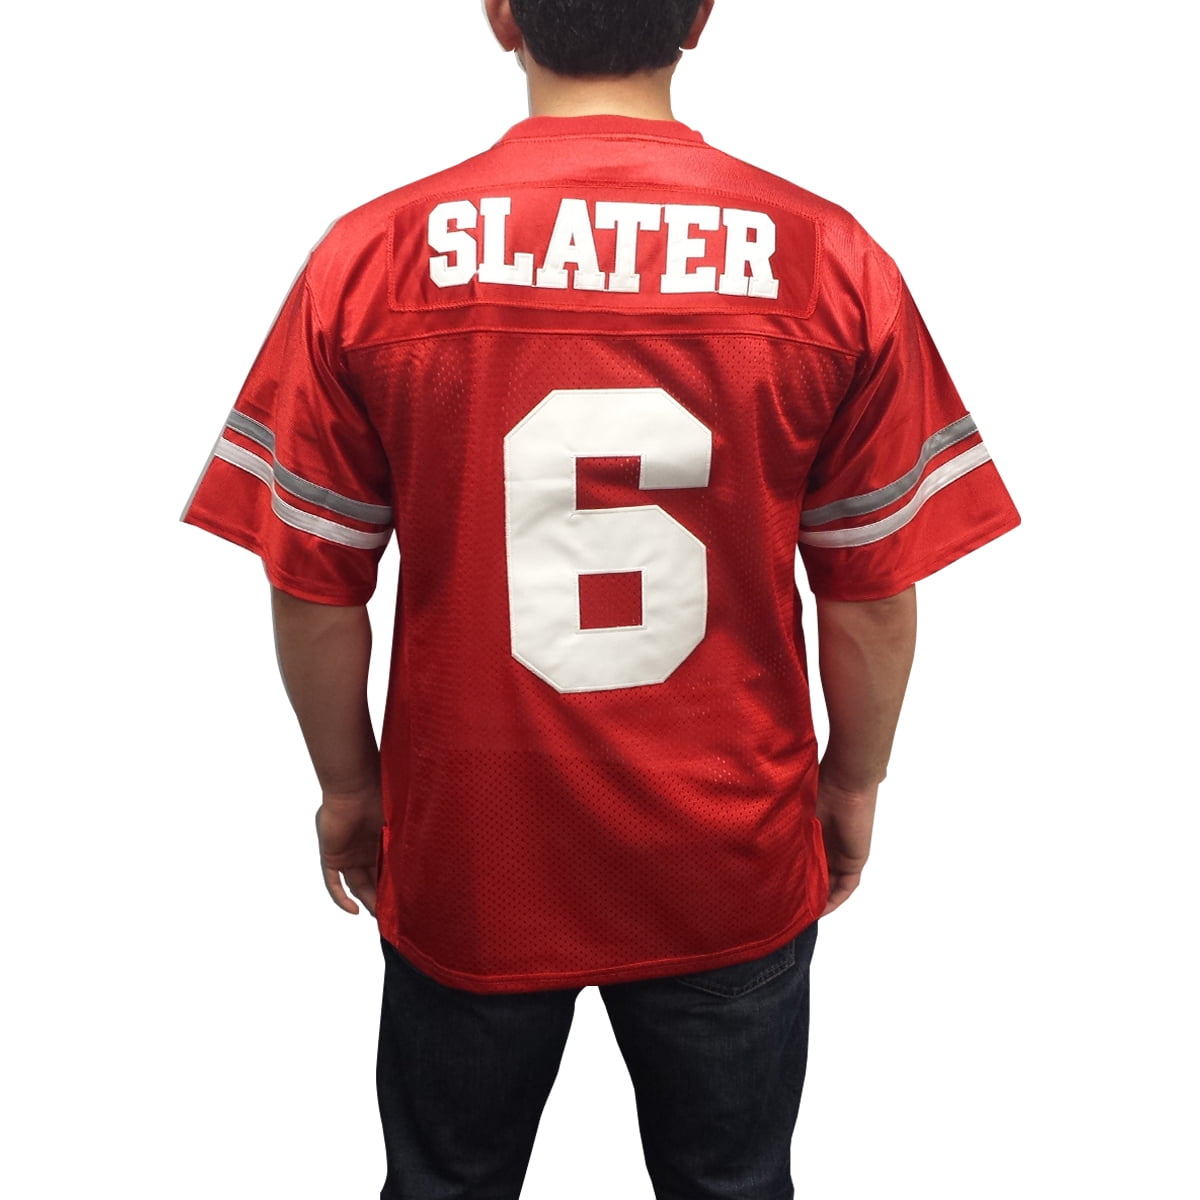 A.C Slater #6 Bayside Football Jersey Saved By The Bell AC Costume Uniform TV 